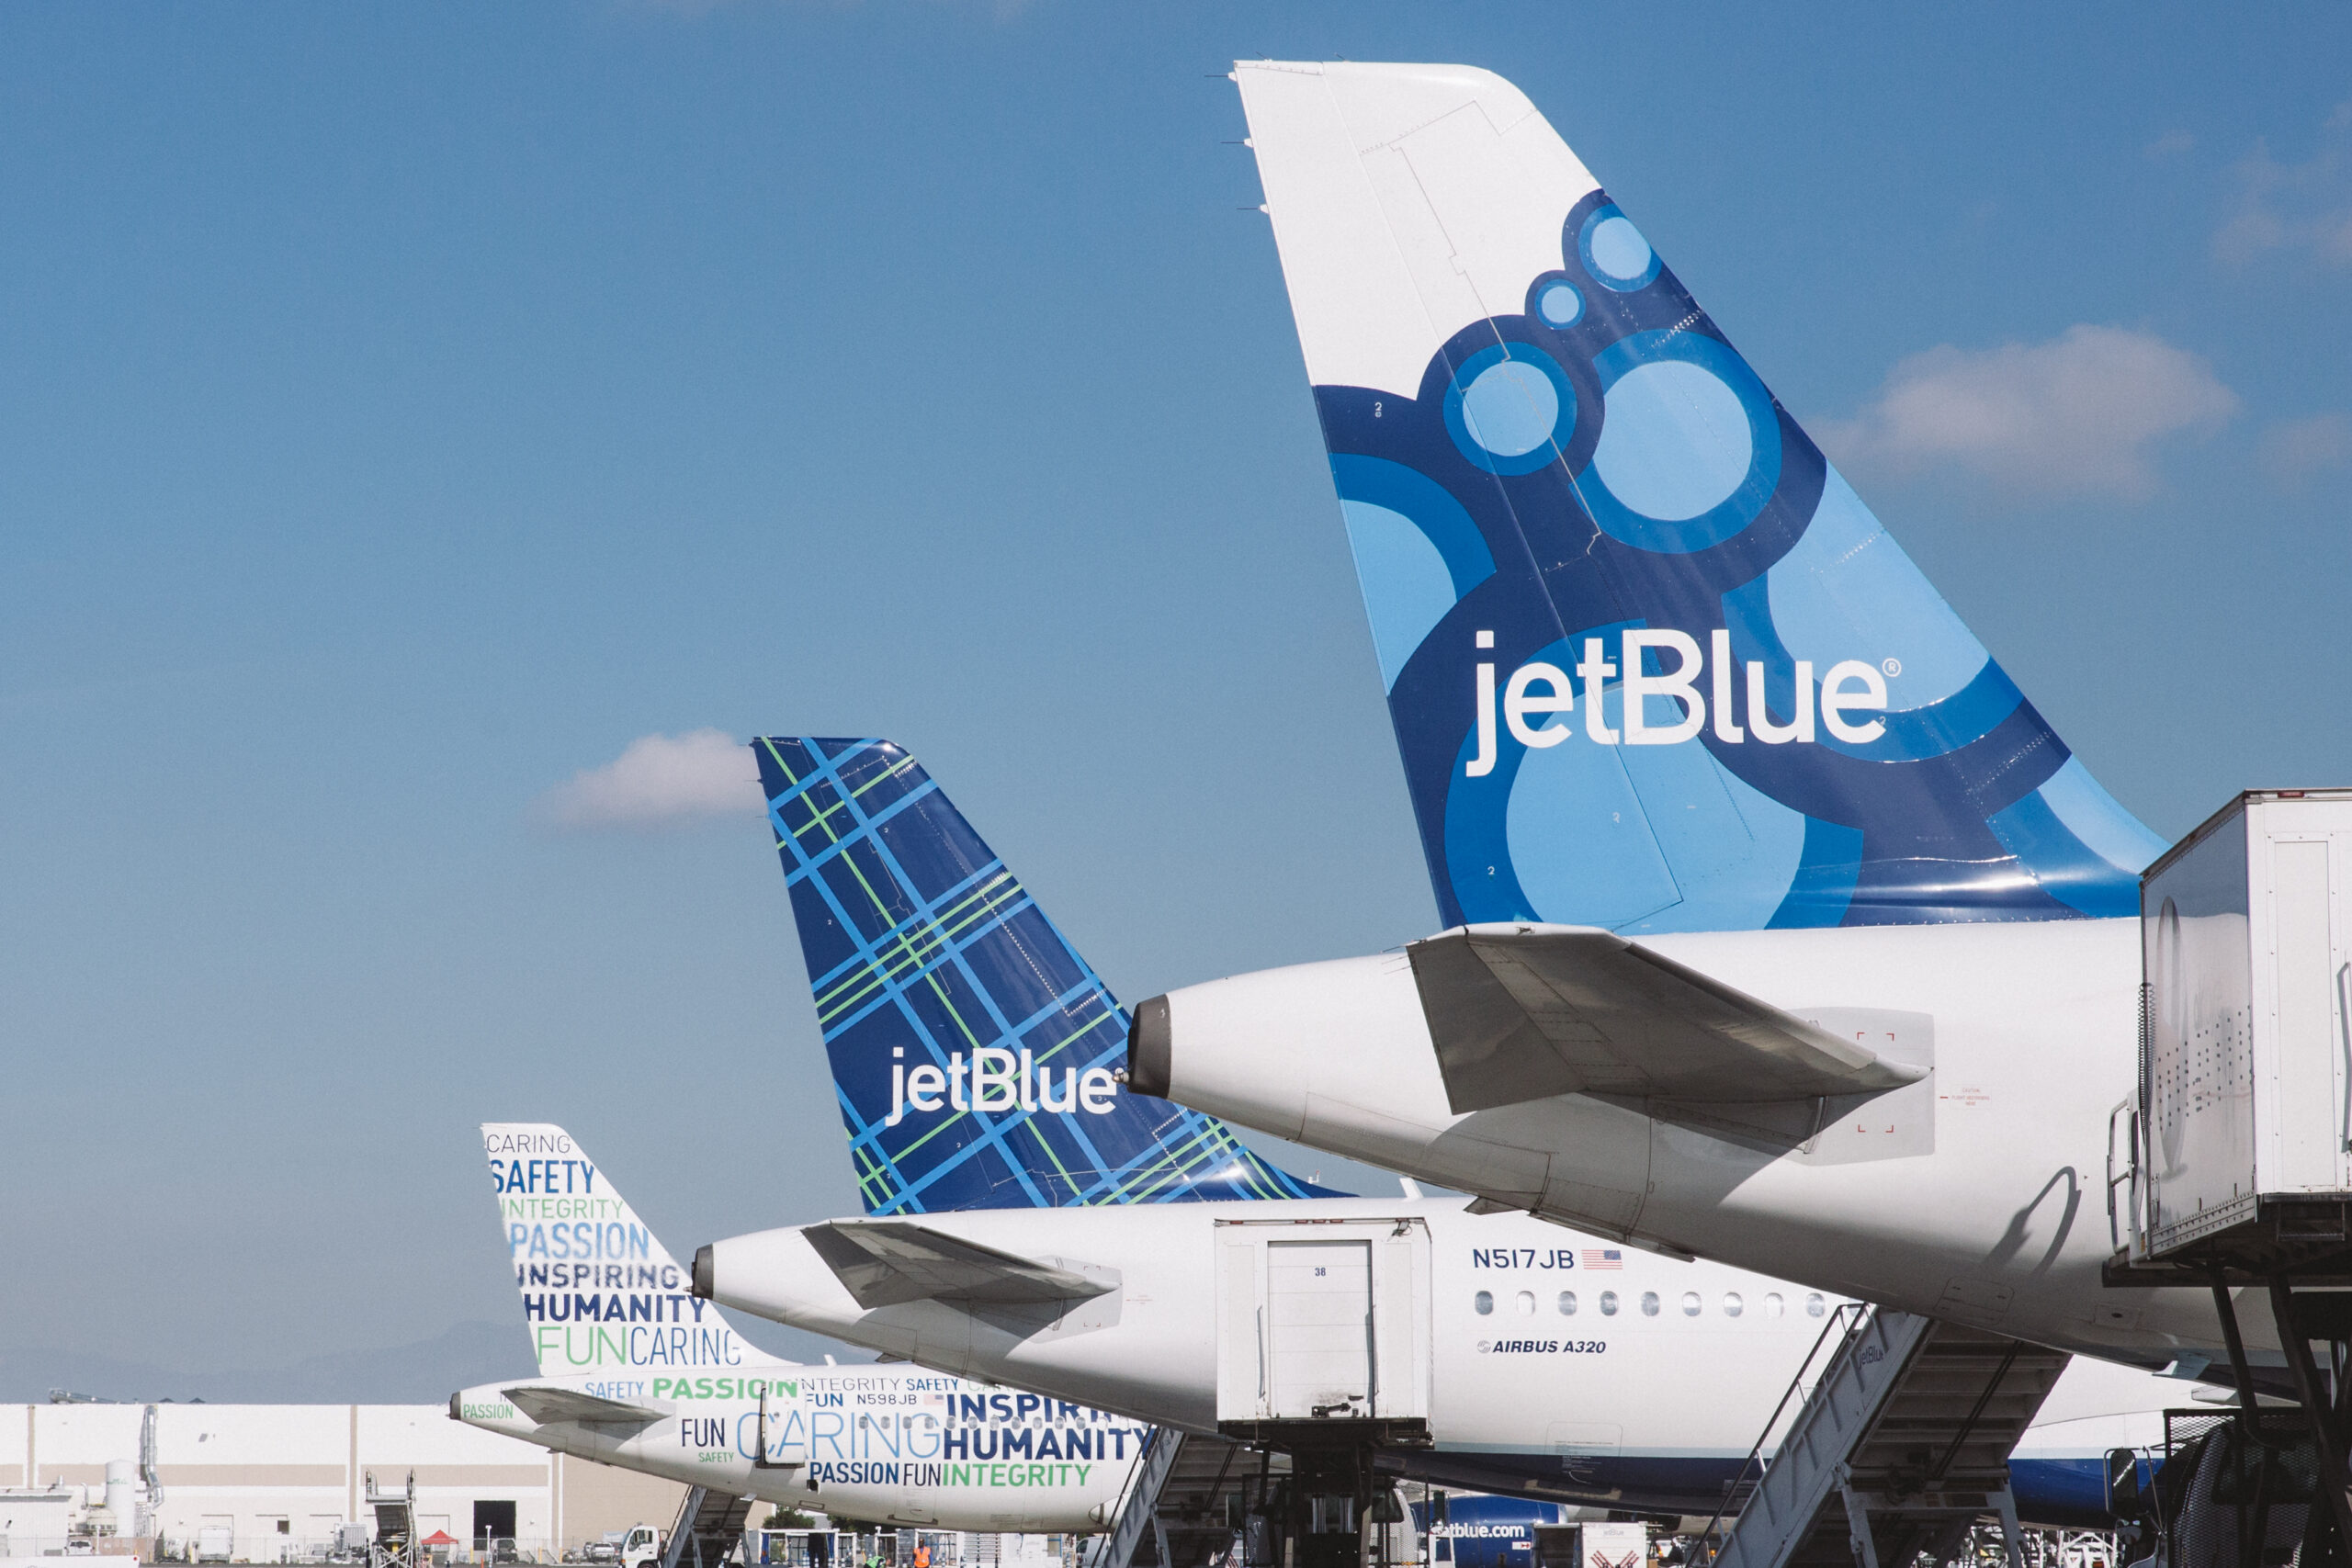 JetBlue Plans 200 Daily Flights from Orlando if Spirit Merger Goes Ahead